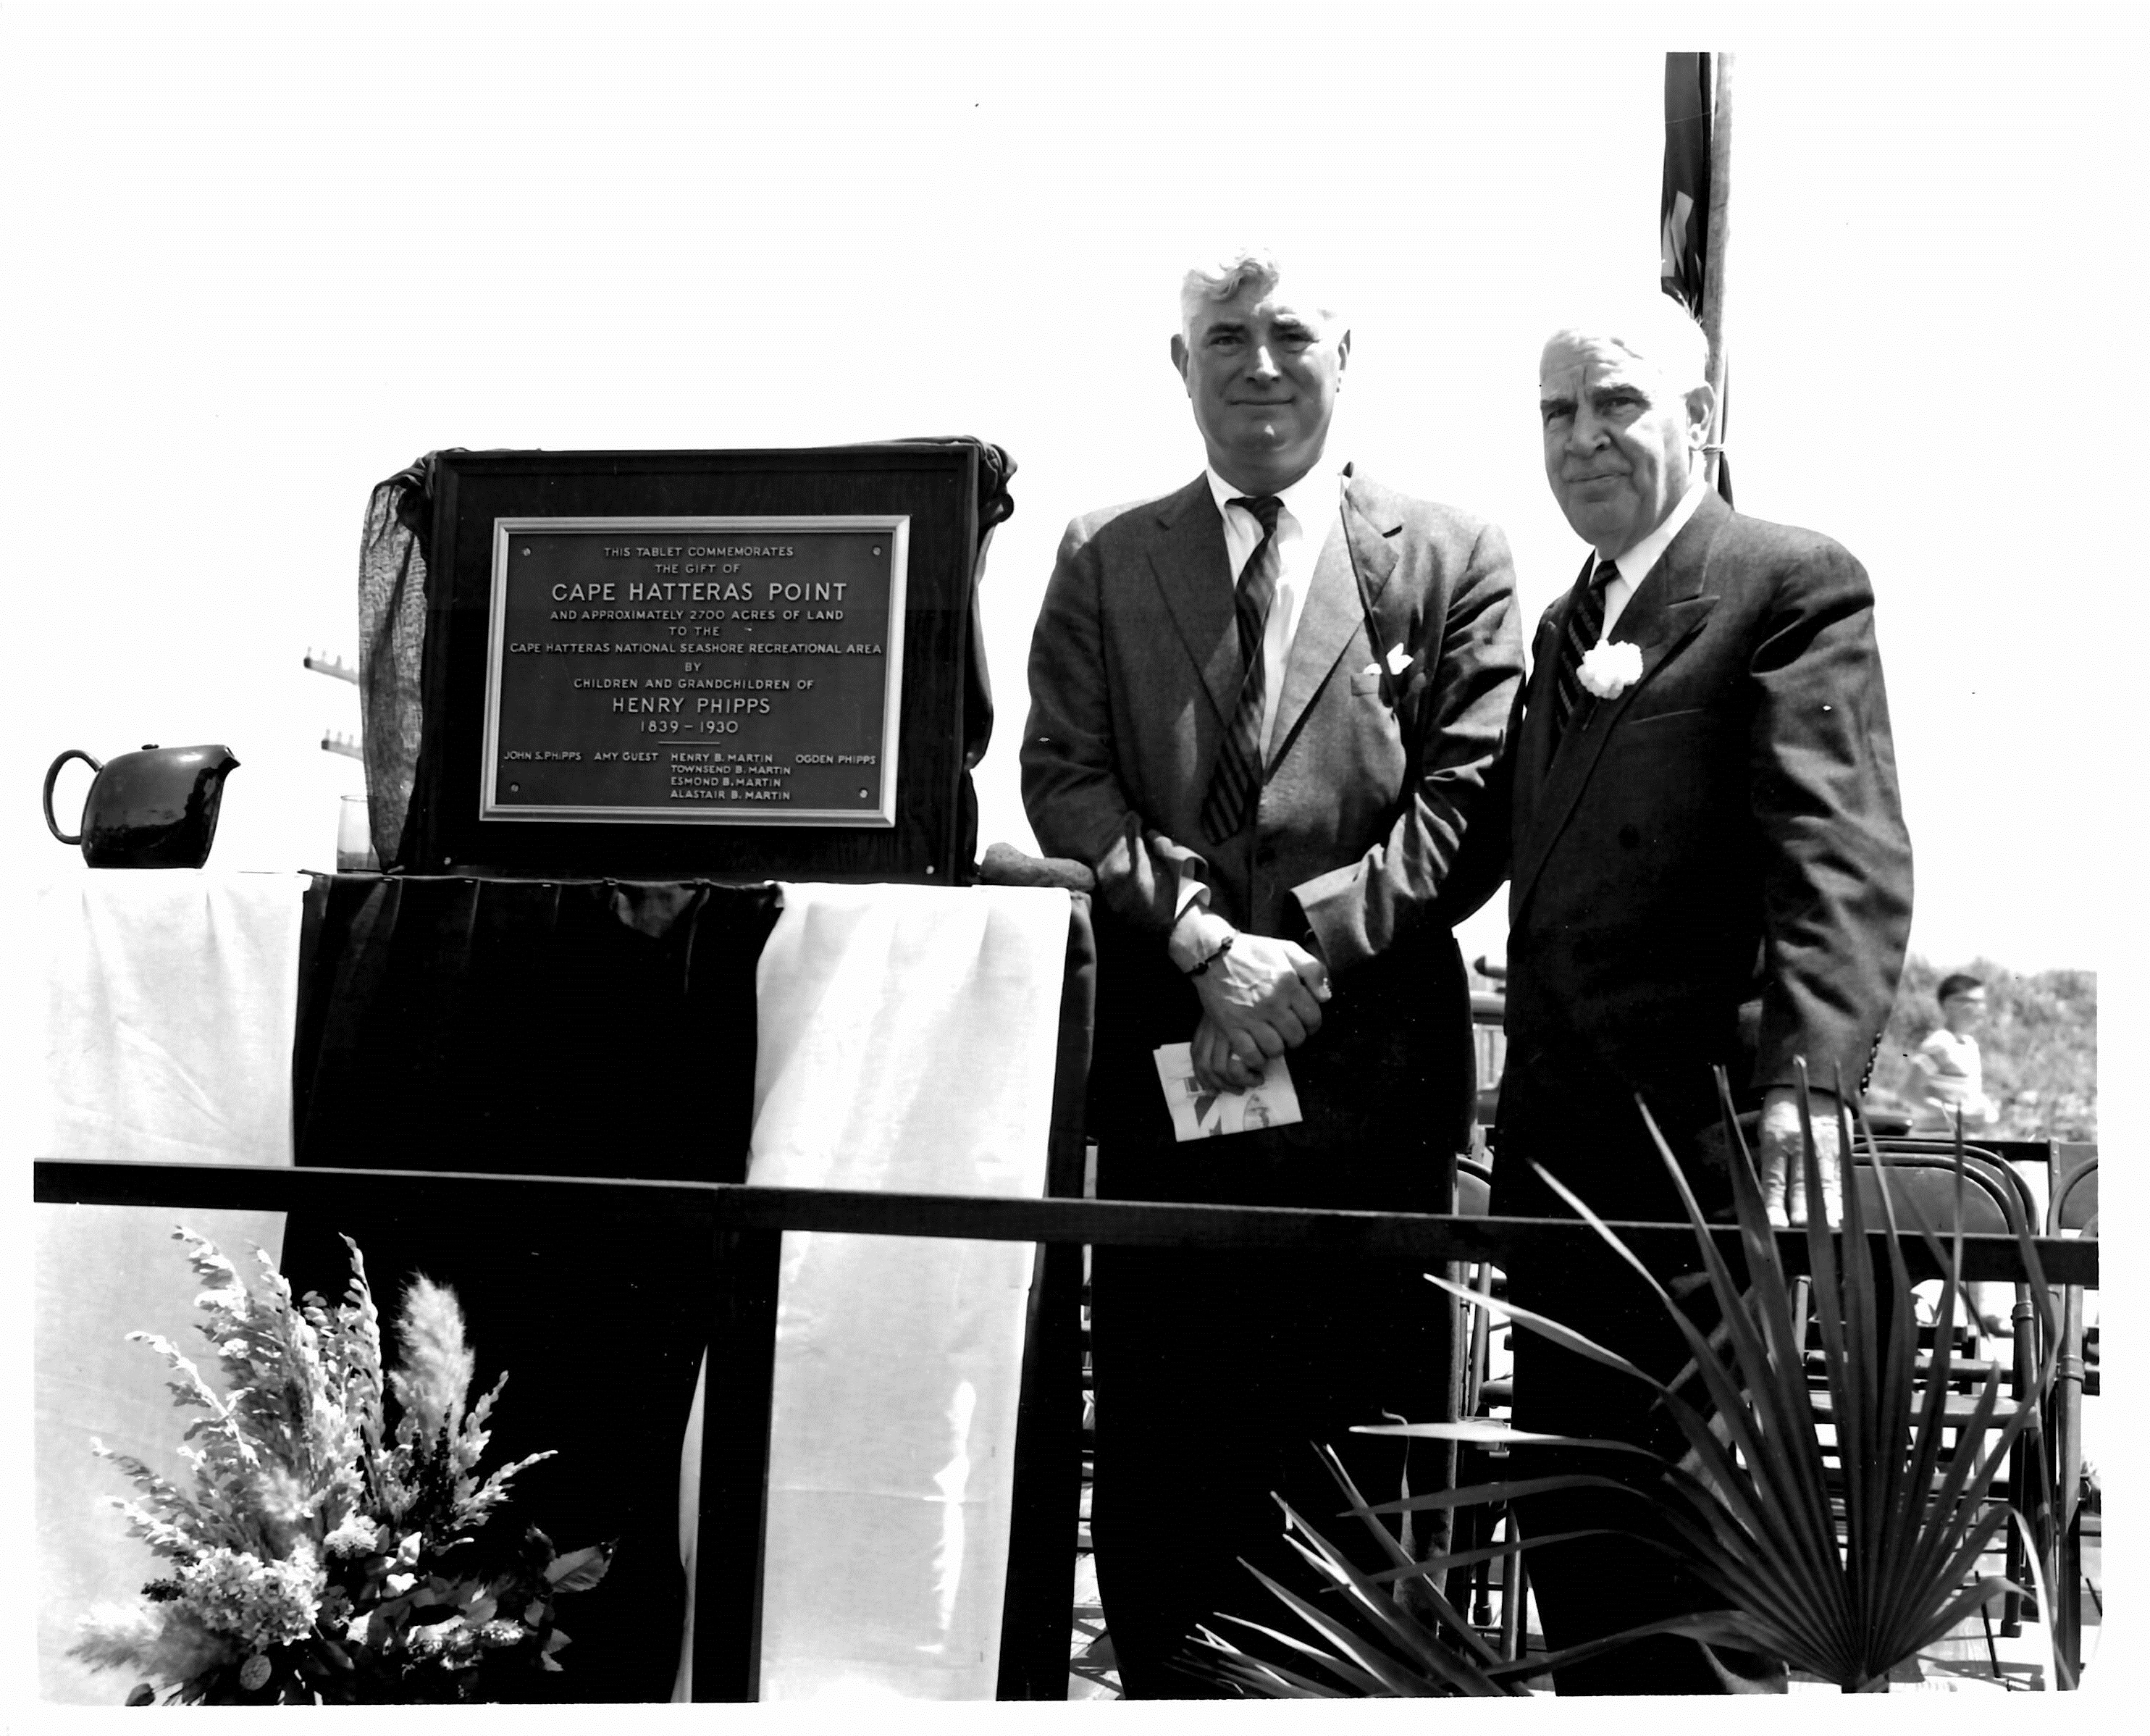 (L-R) Raymond Guest and Governor Luther Hodges standing next to dedication plaque.